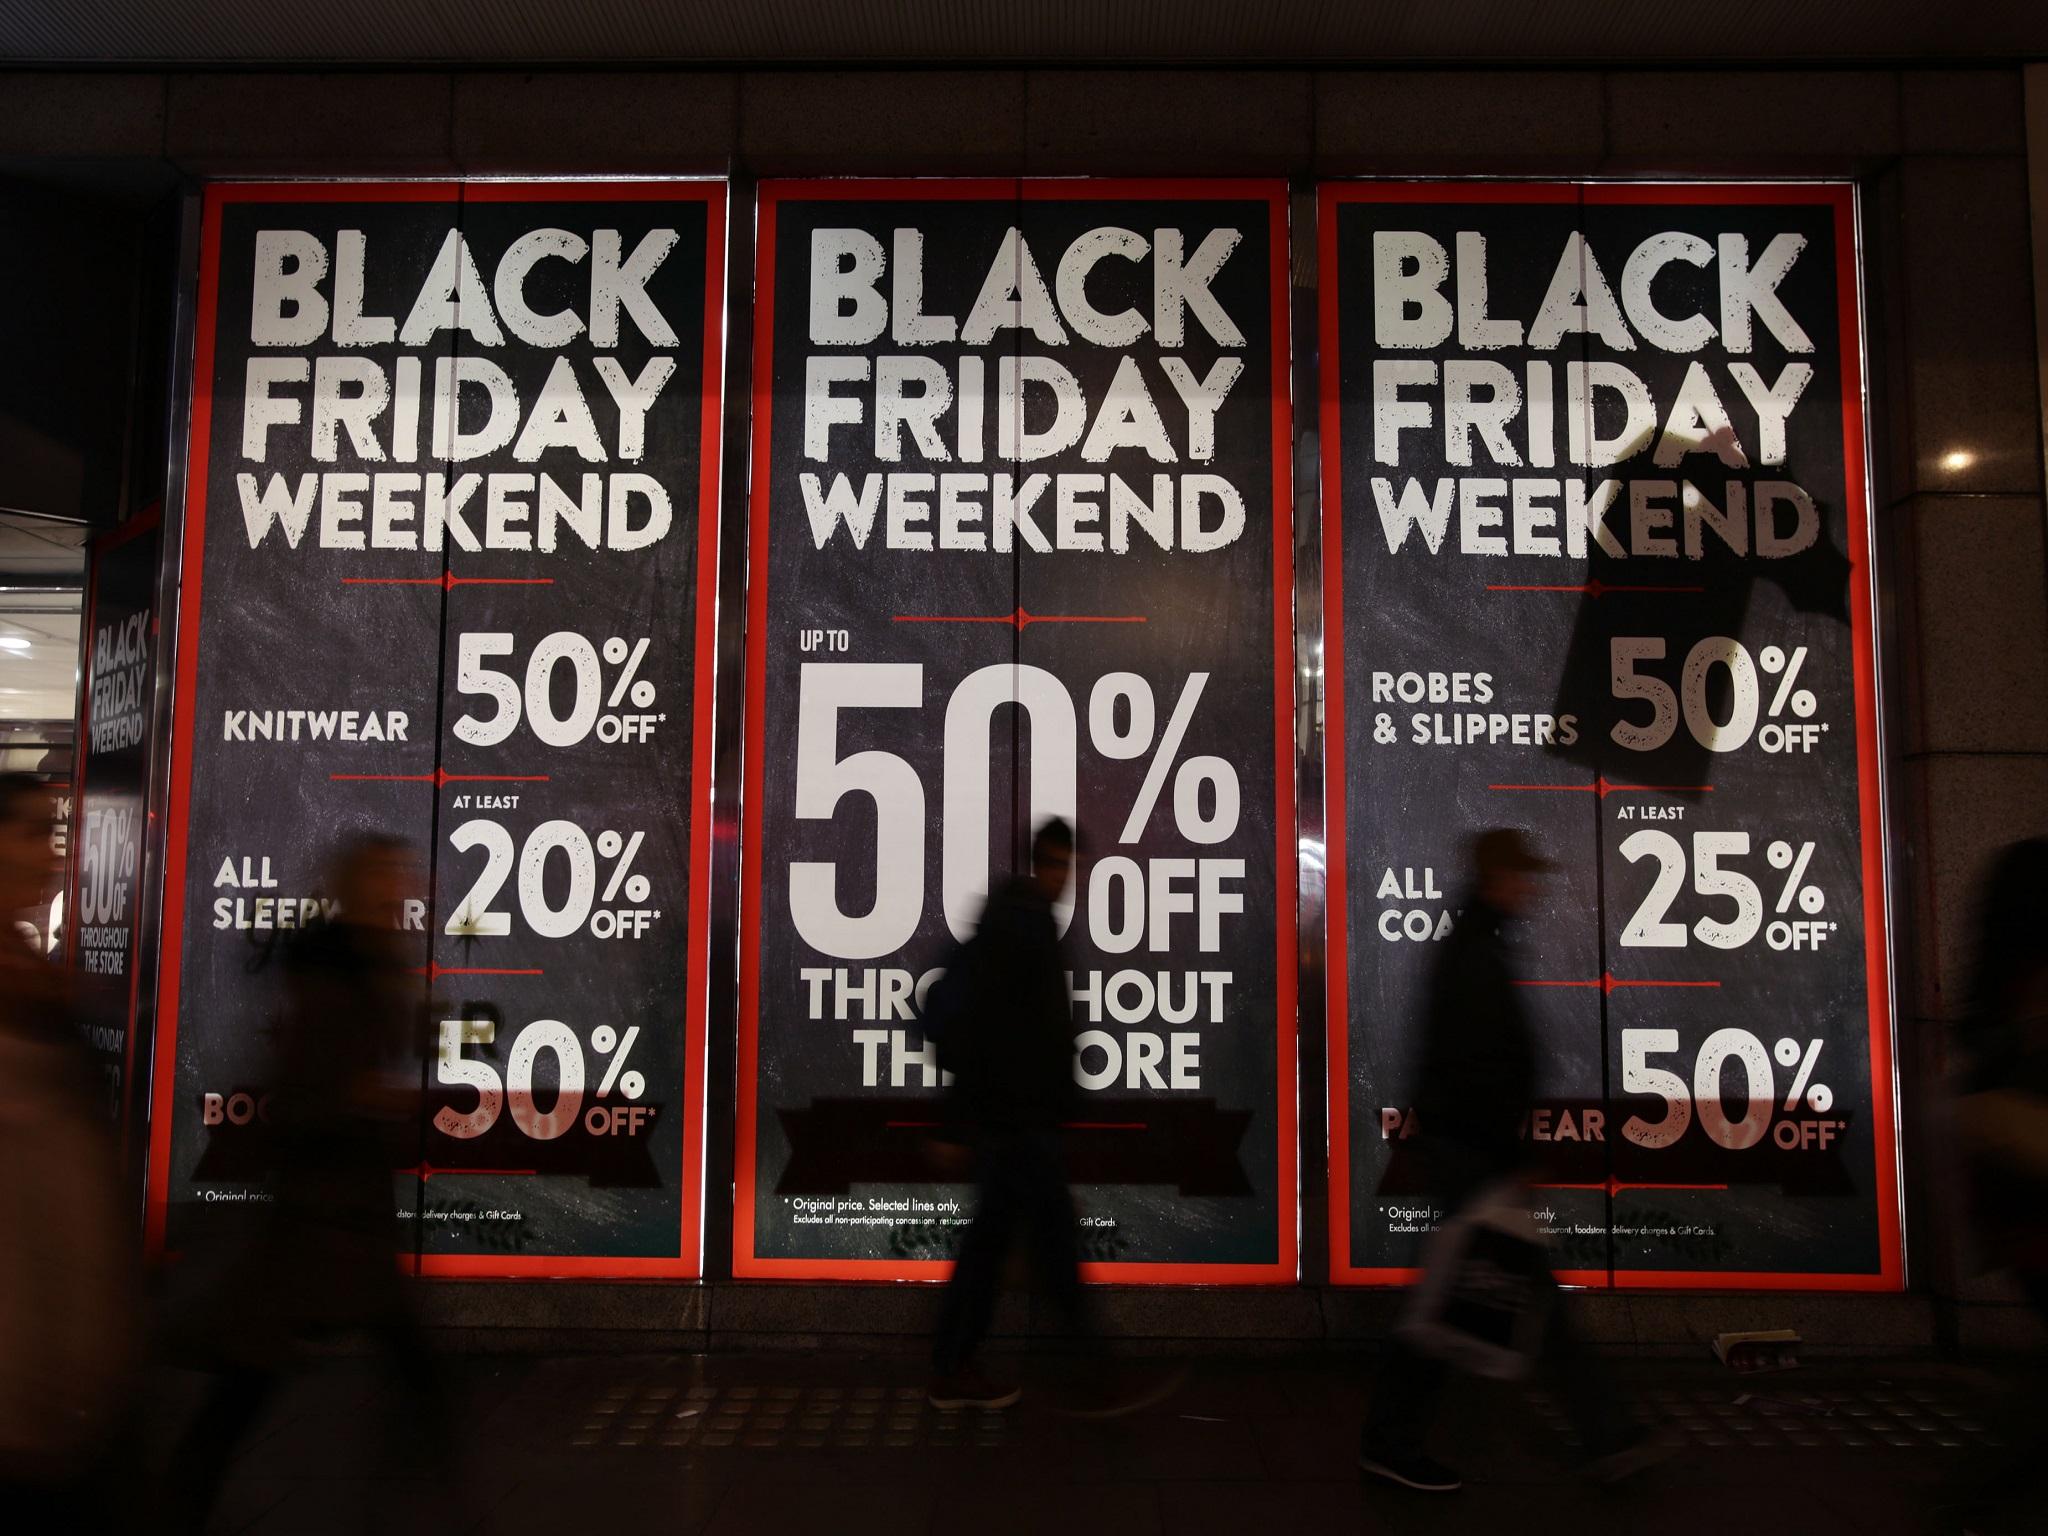 Black Friday is the busiest shopping day of the year